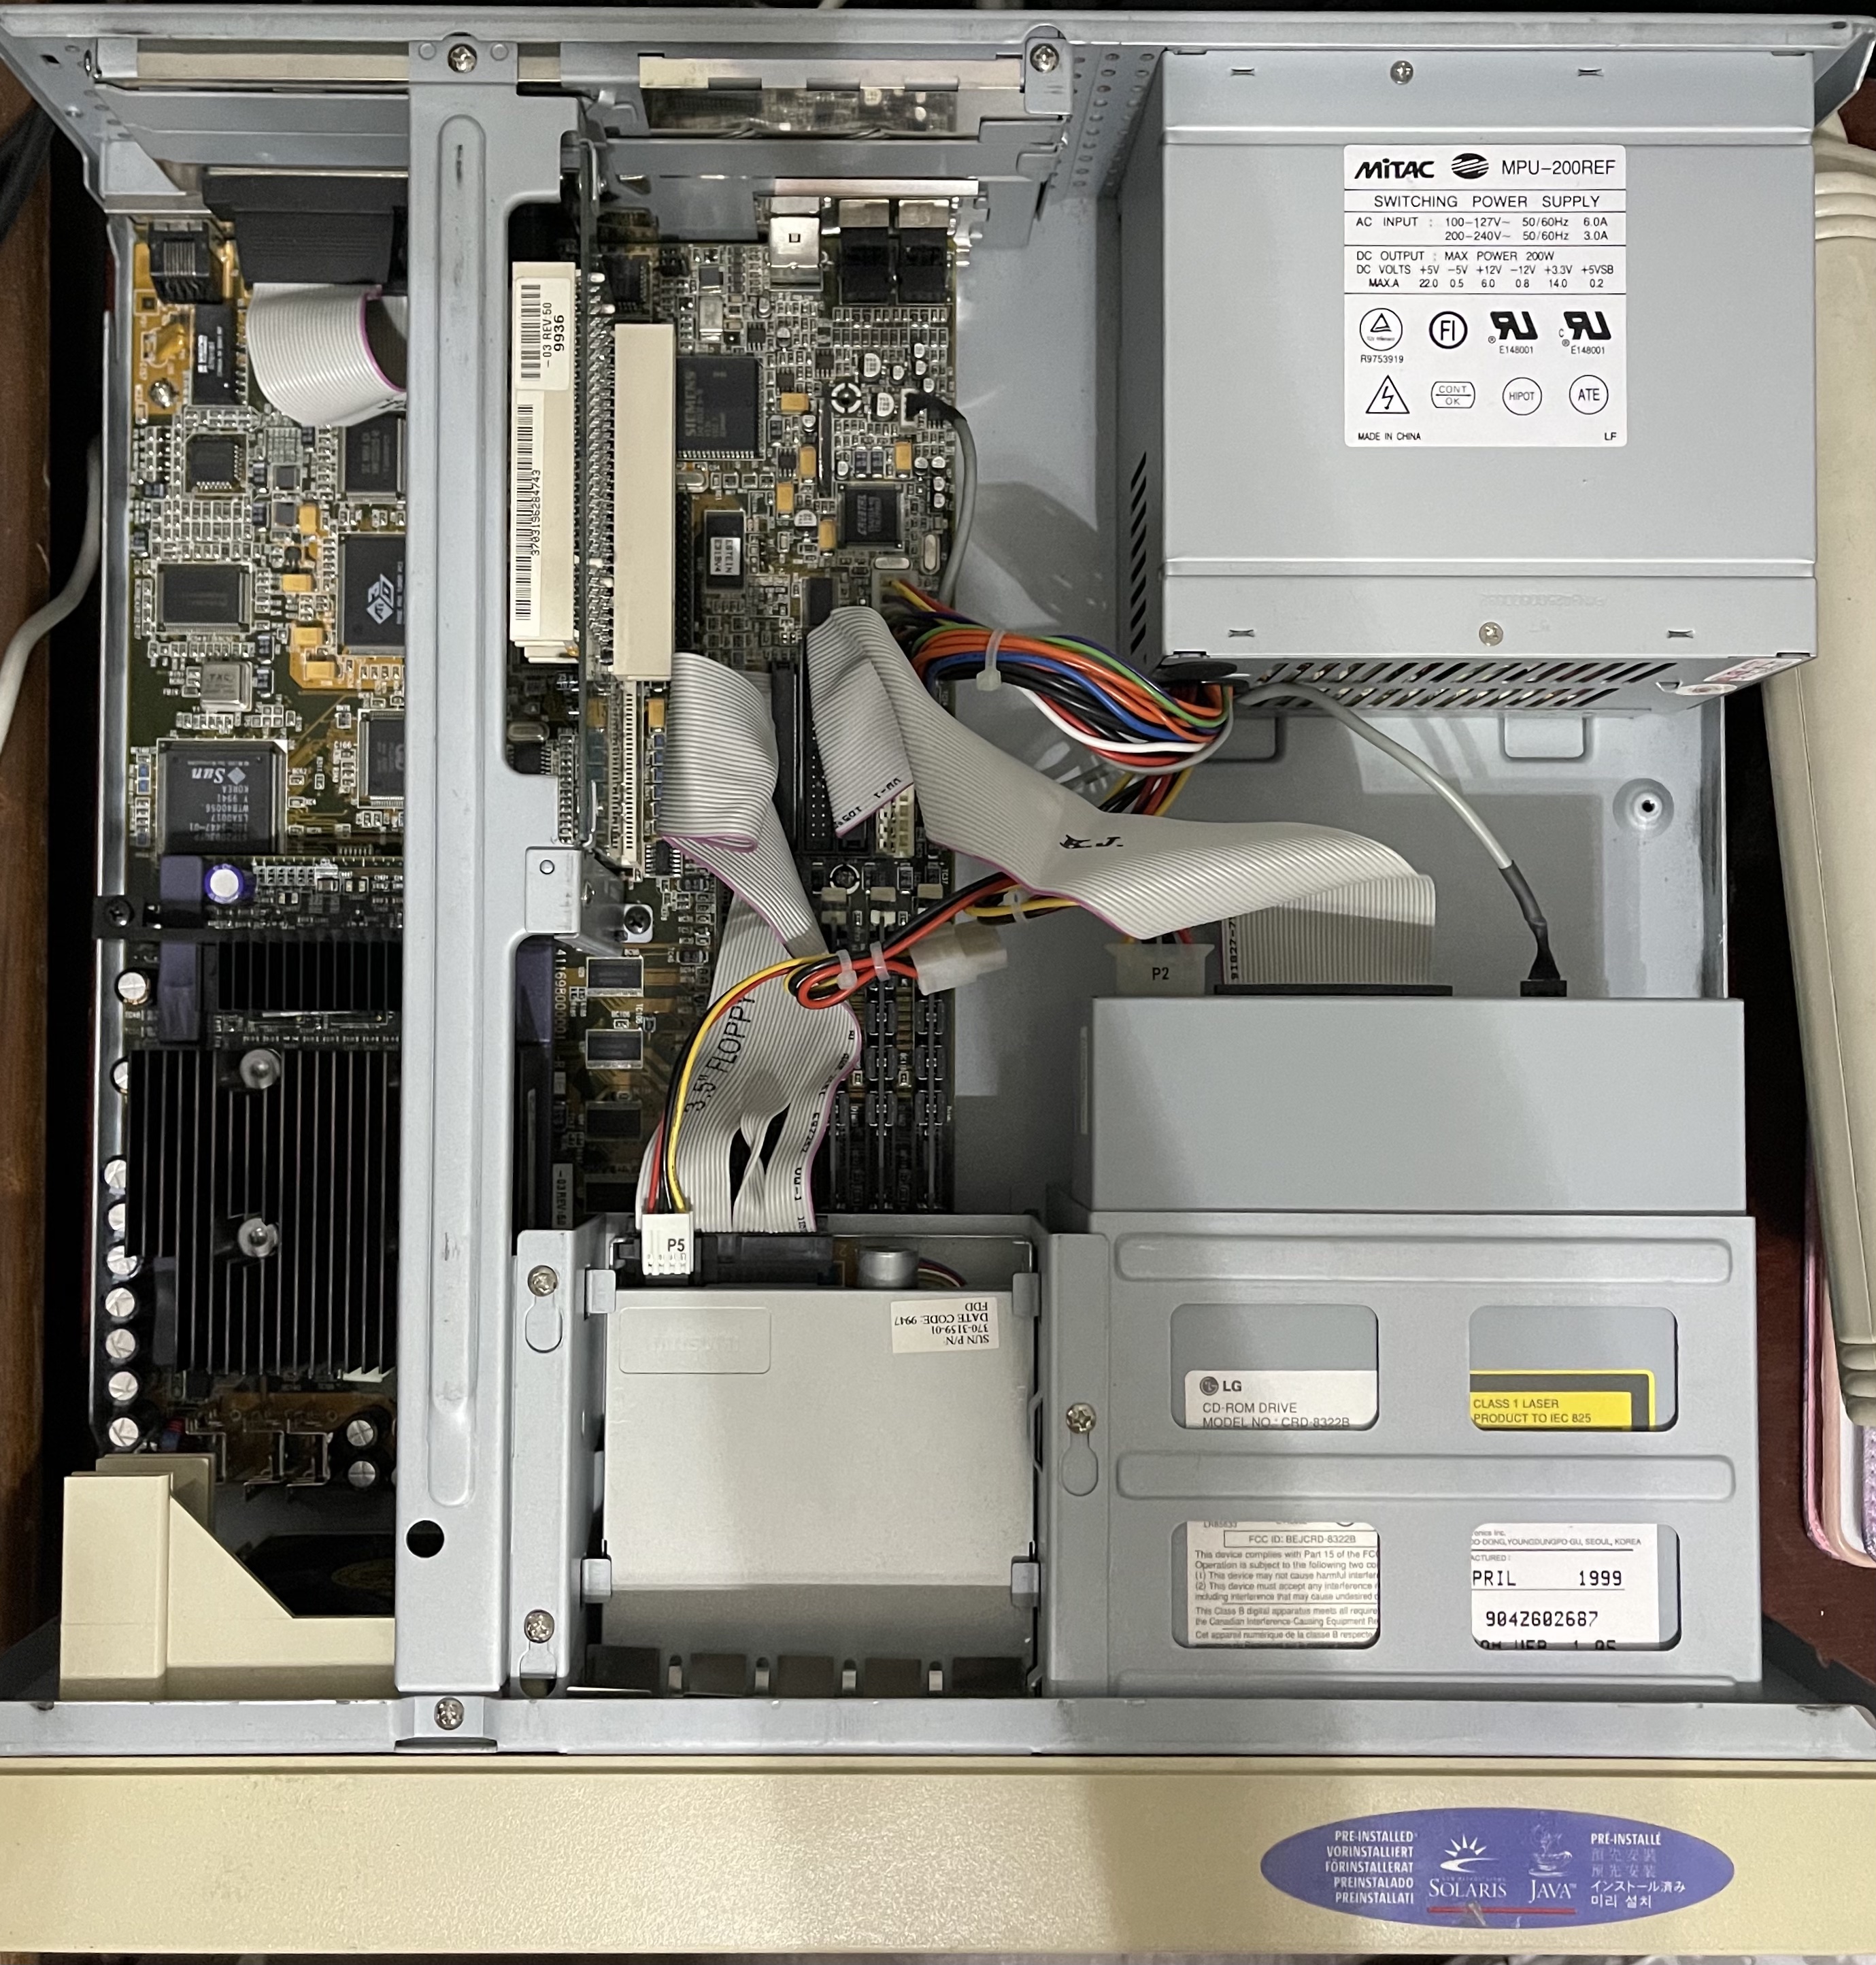 A look at the inside sans hard drive